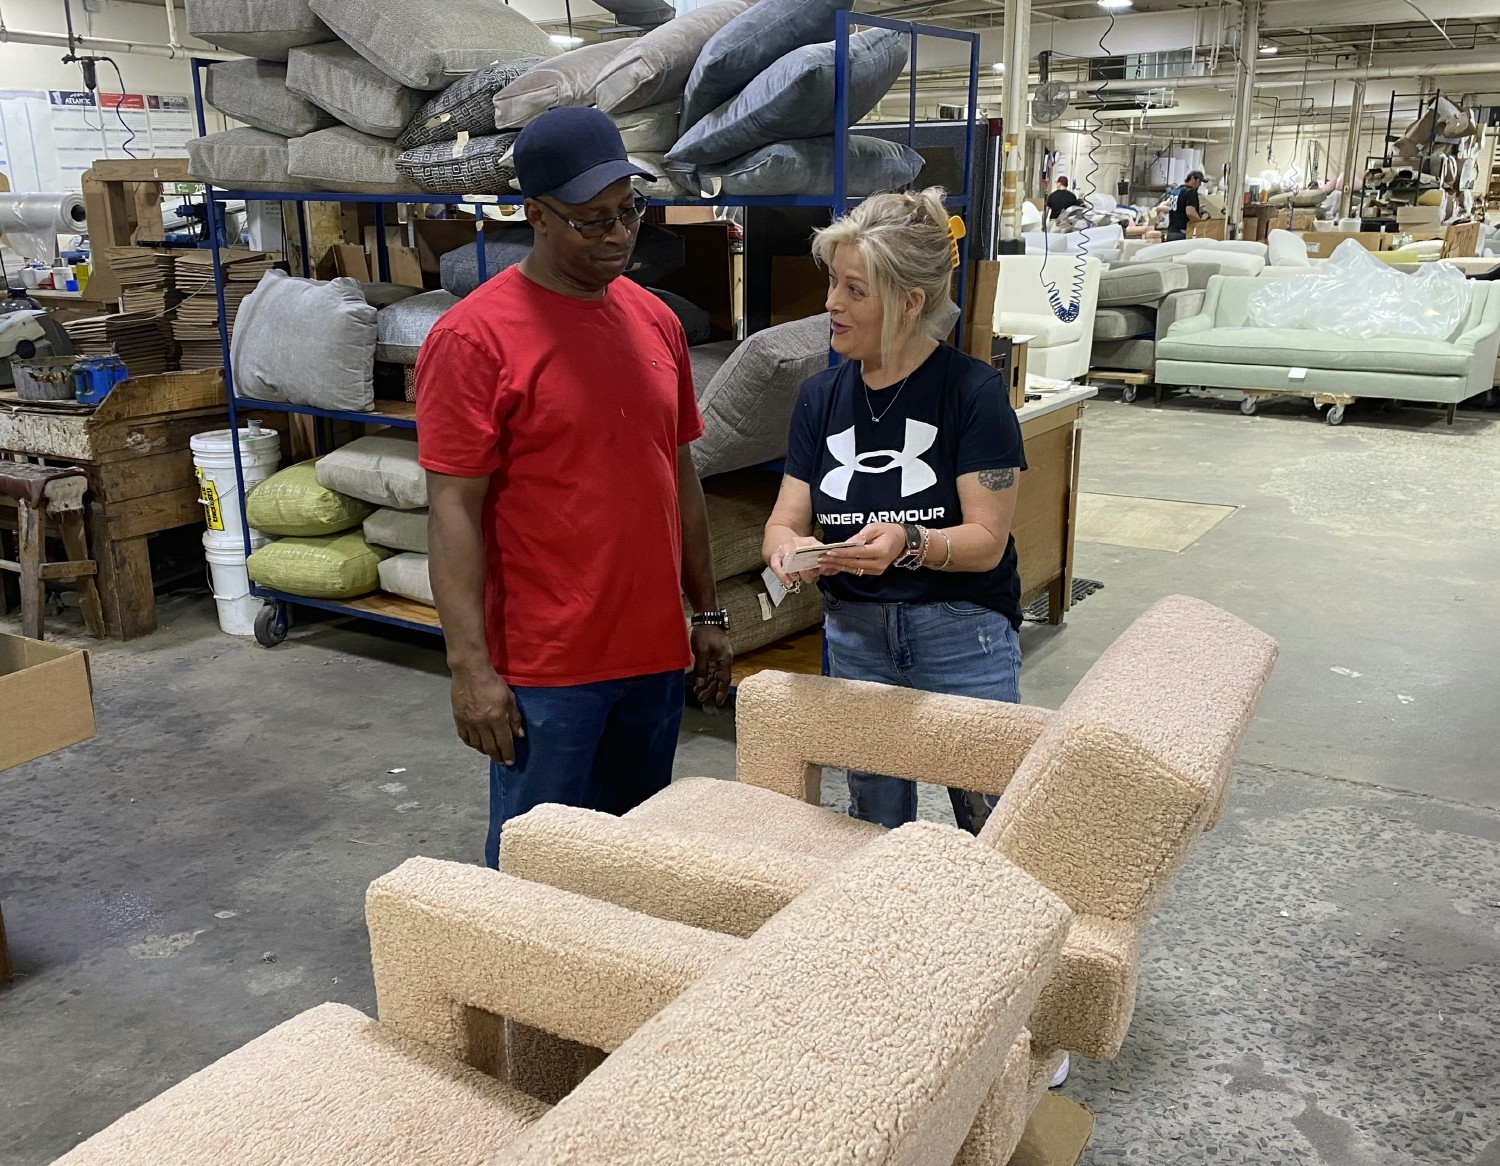 Members of the Tomlinson team working together with care and passion to make beautiful furniture pieces.